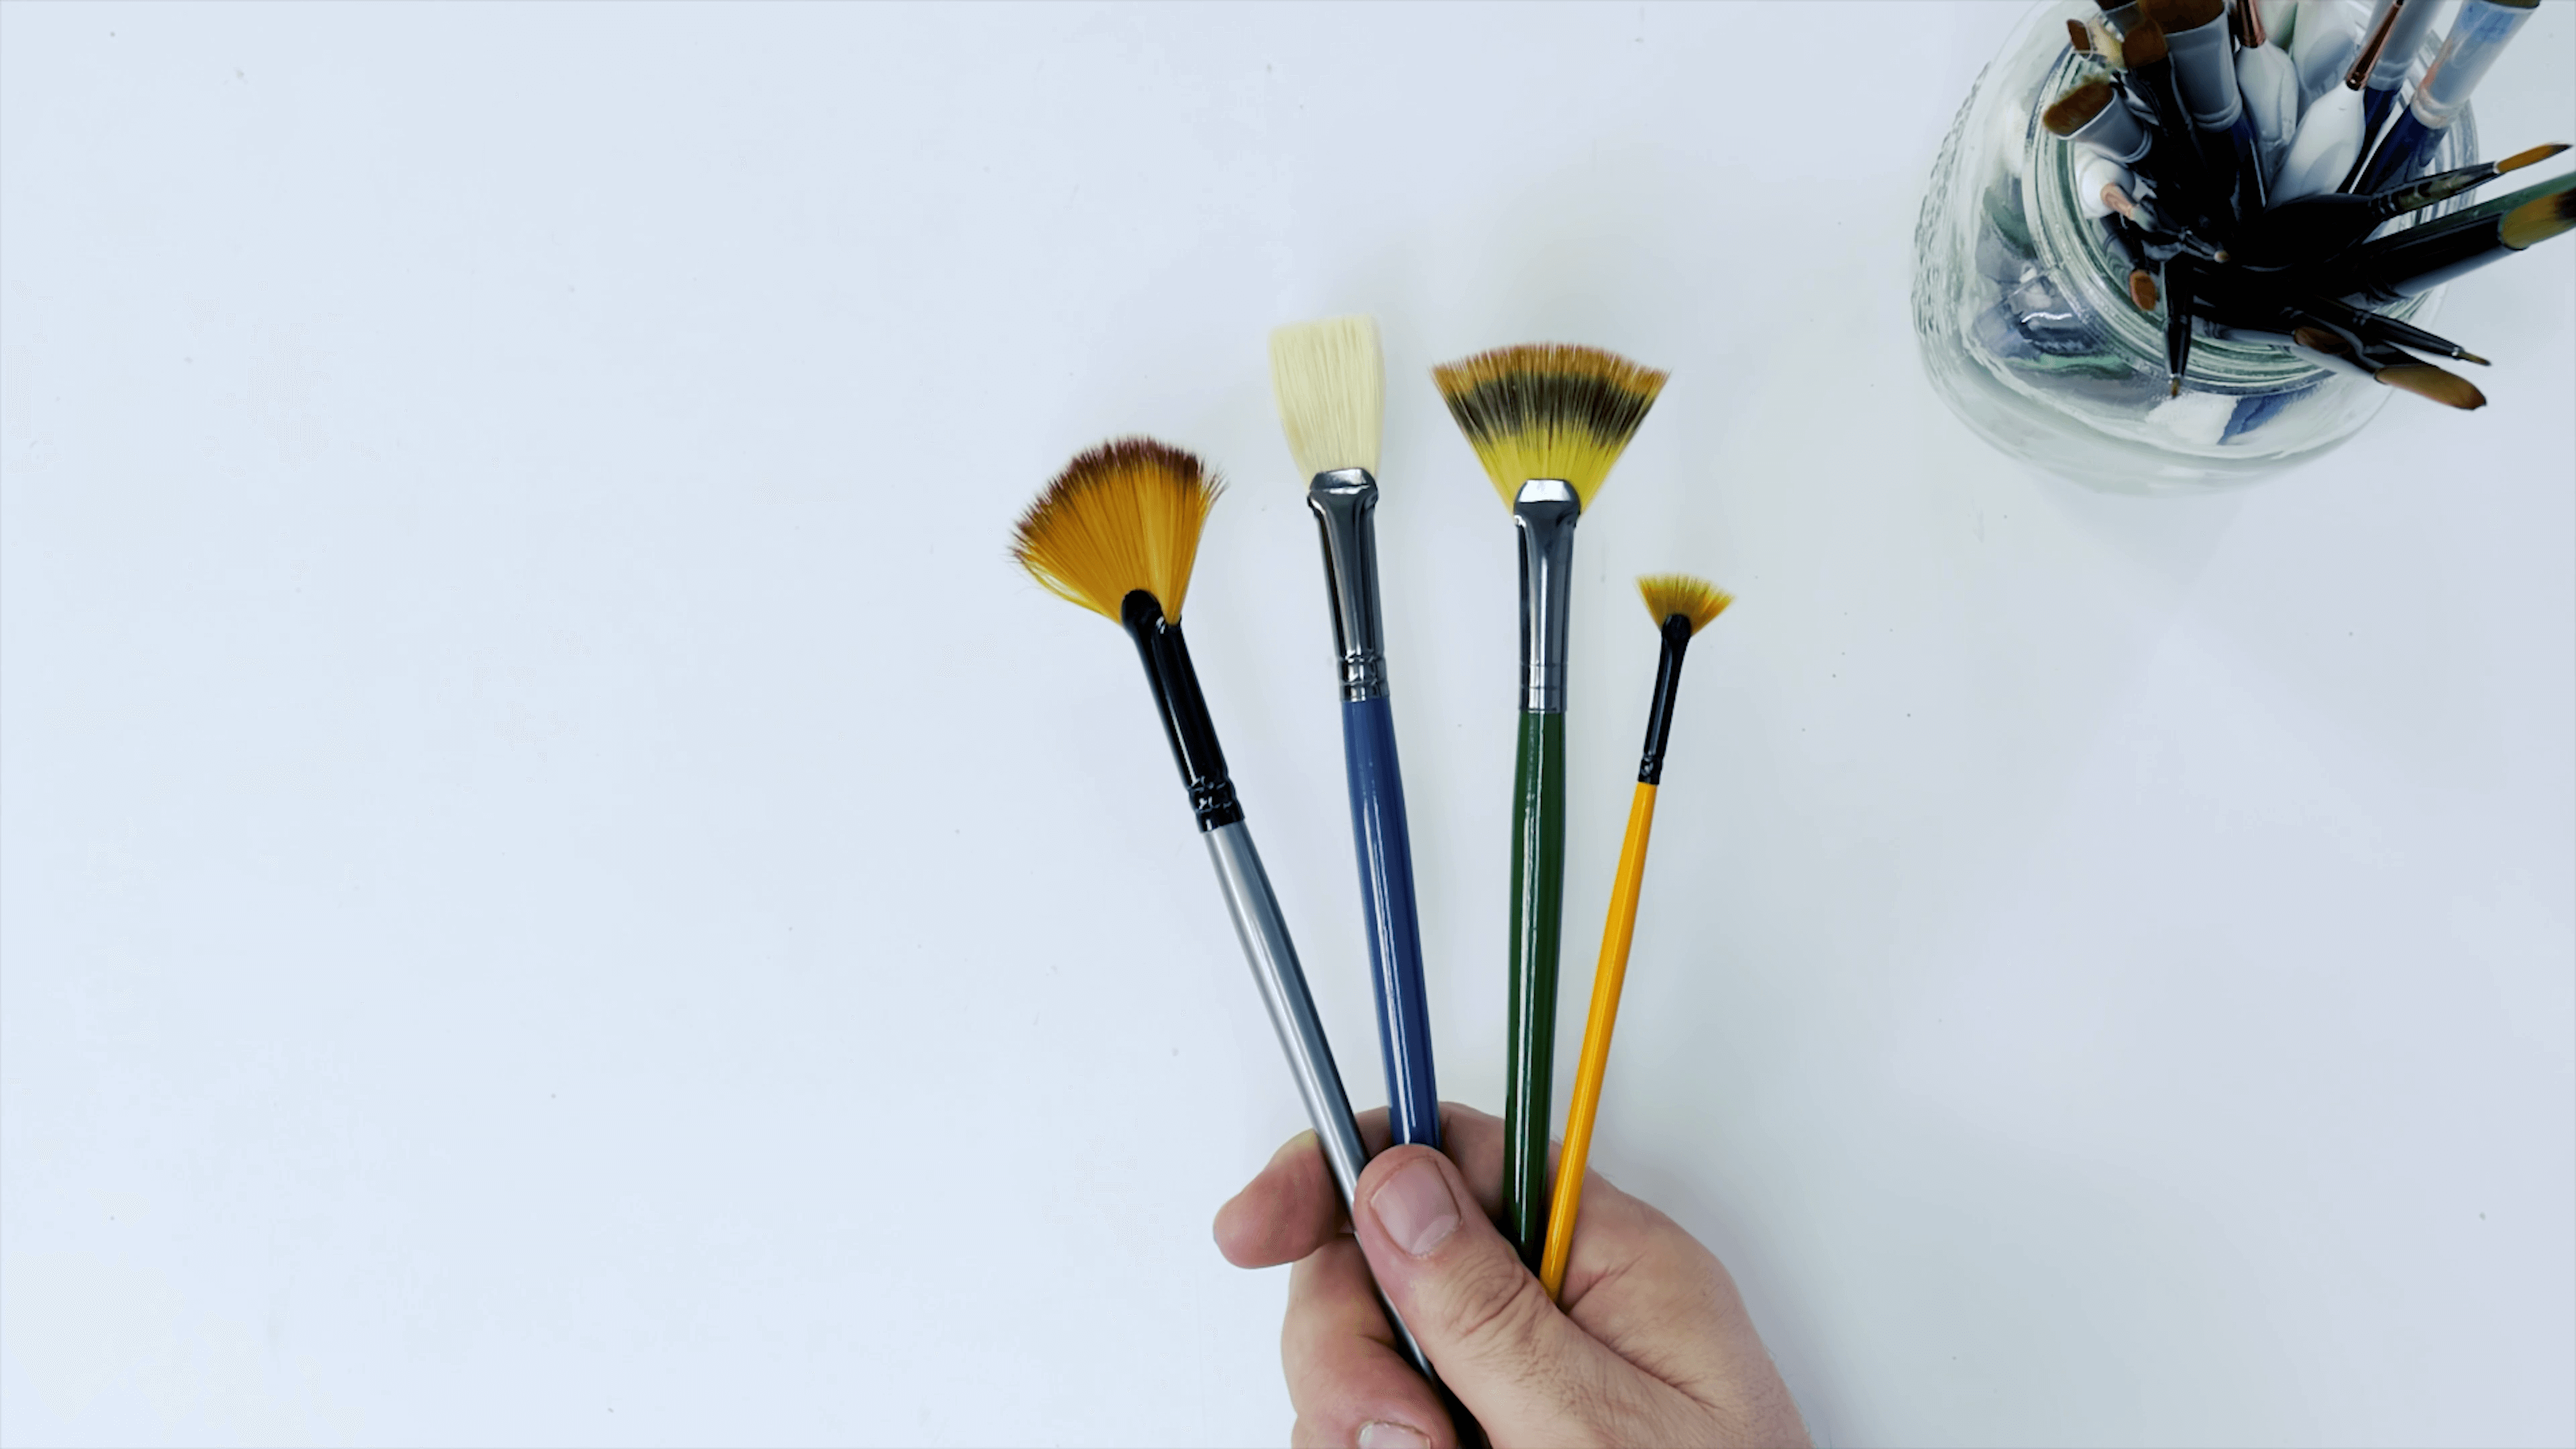 Paint brushes : r/paintbynumbers